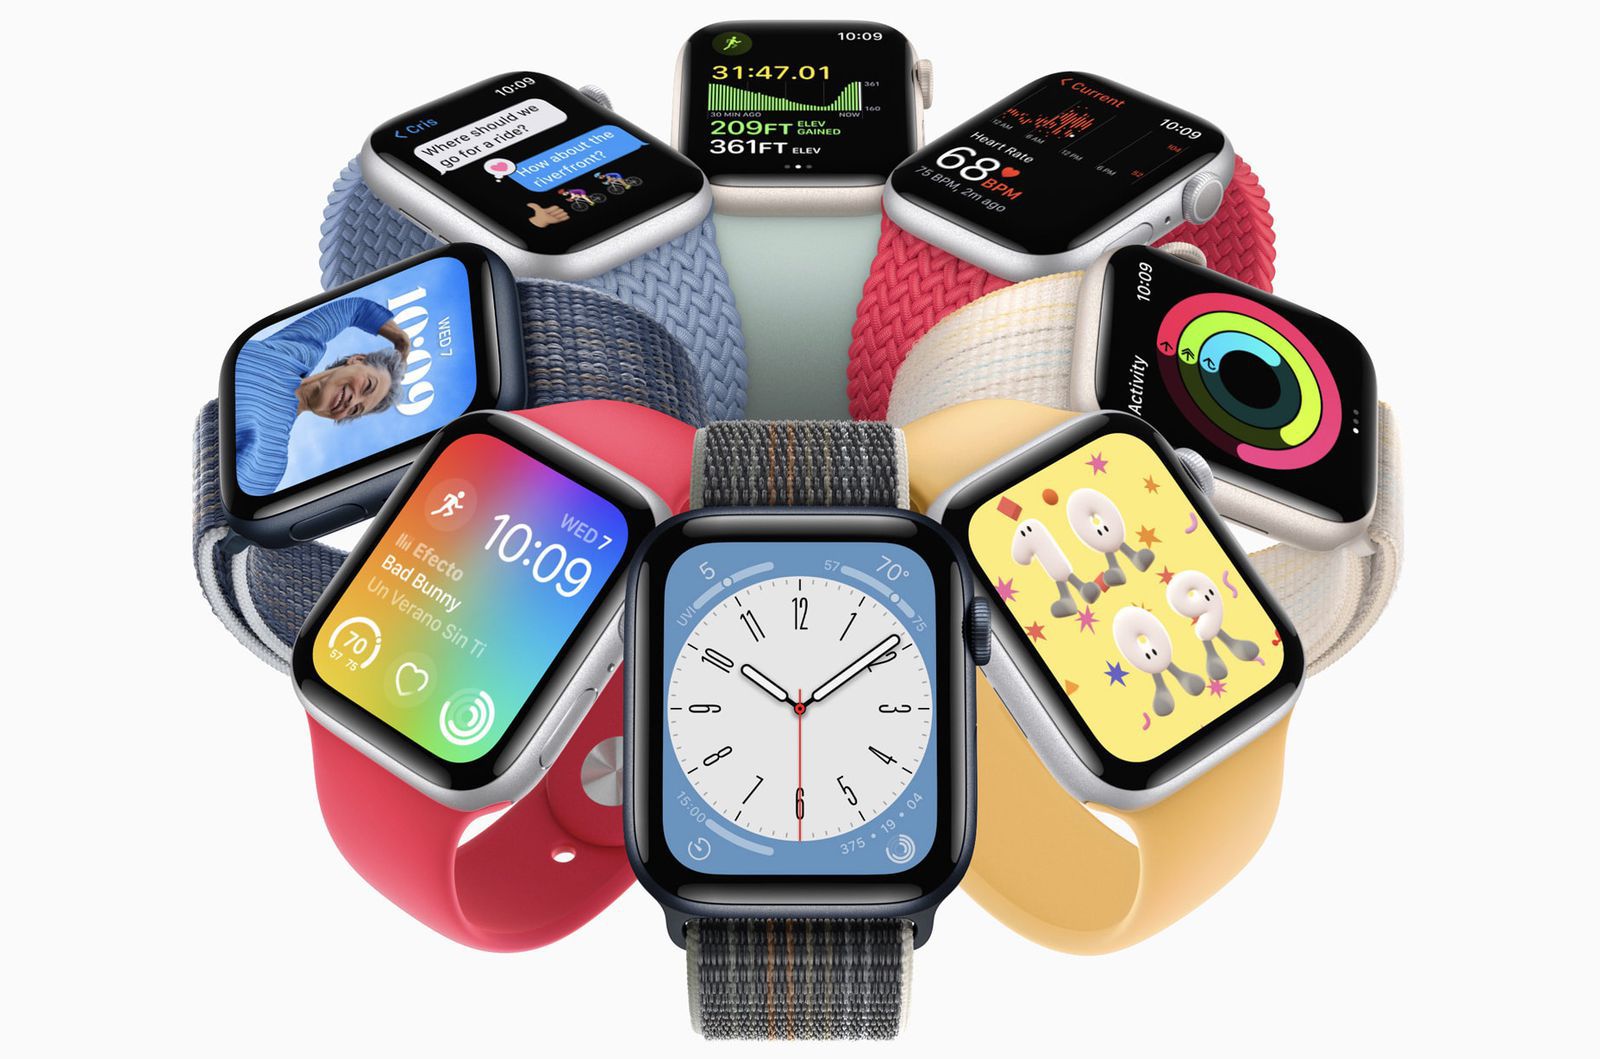 Designer Apple Watch Bands and Straps 2022